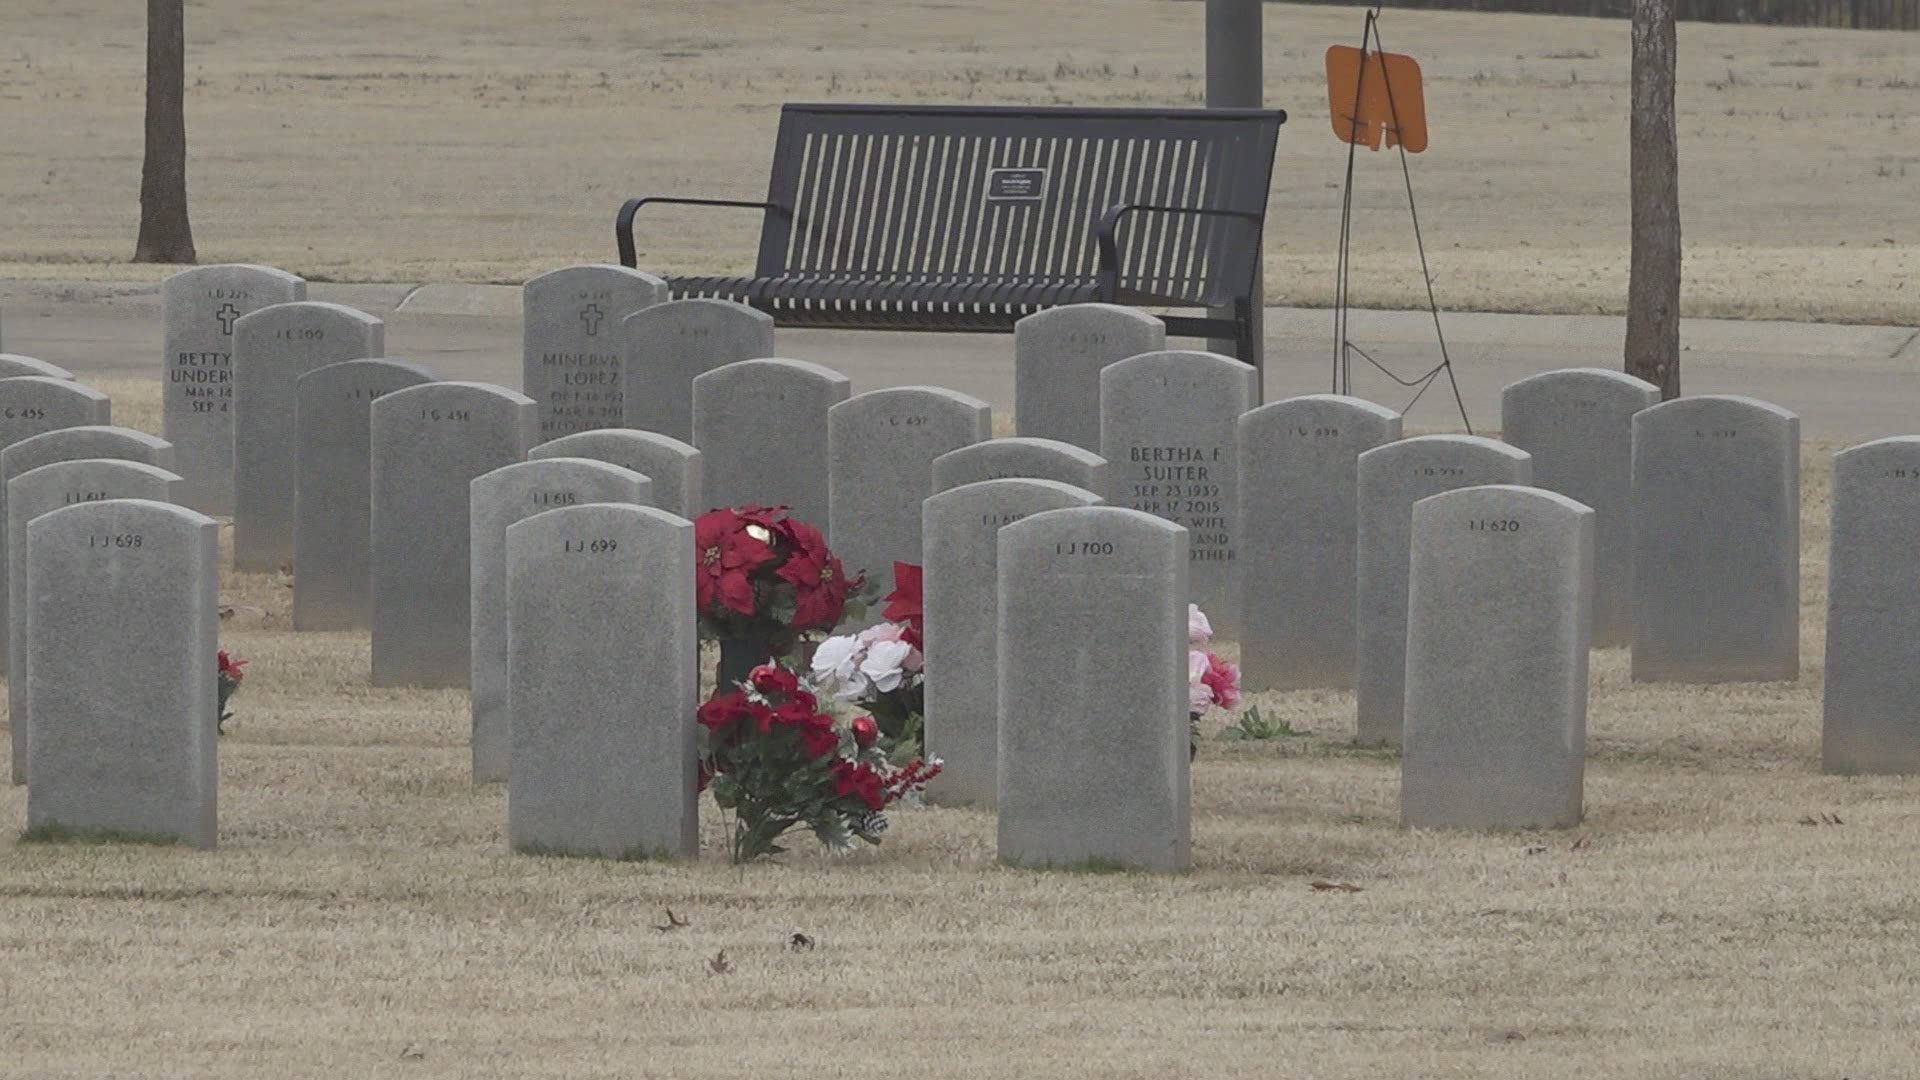 Over 2,000 wreaths arrived in Abilene for the upcoming National Wreaths Across America day.